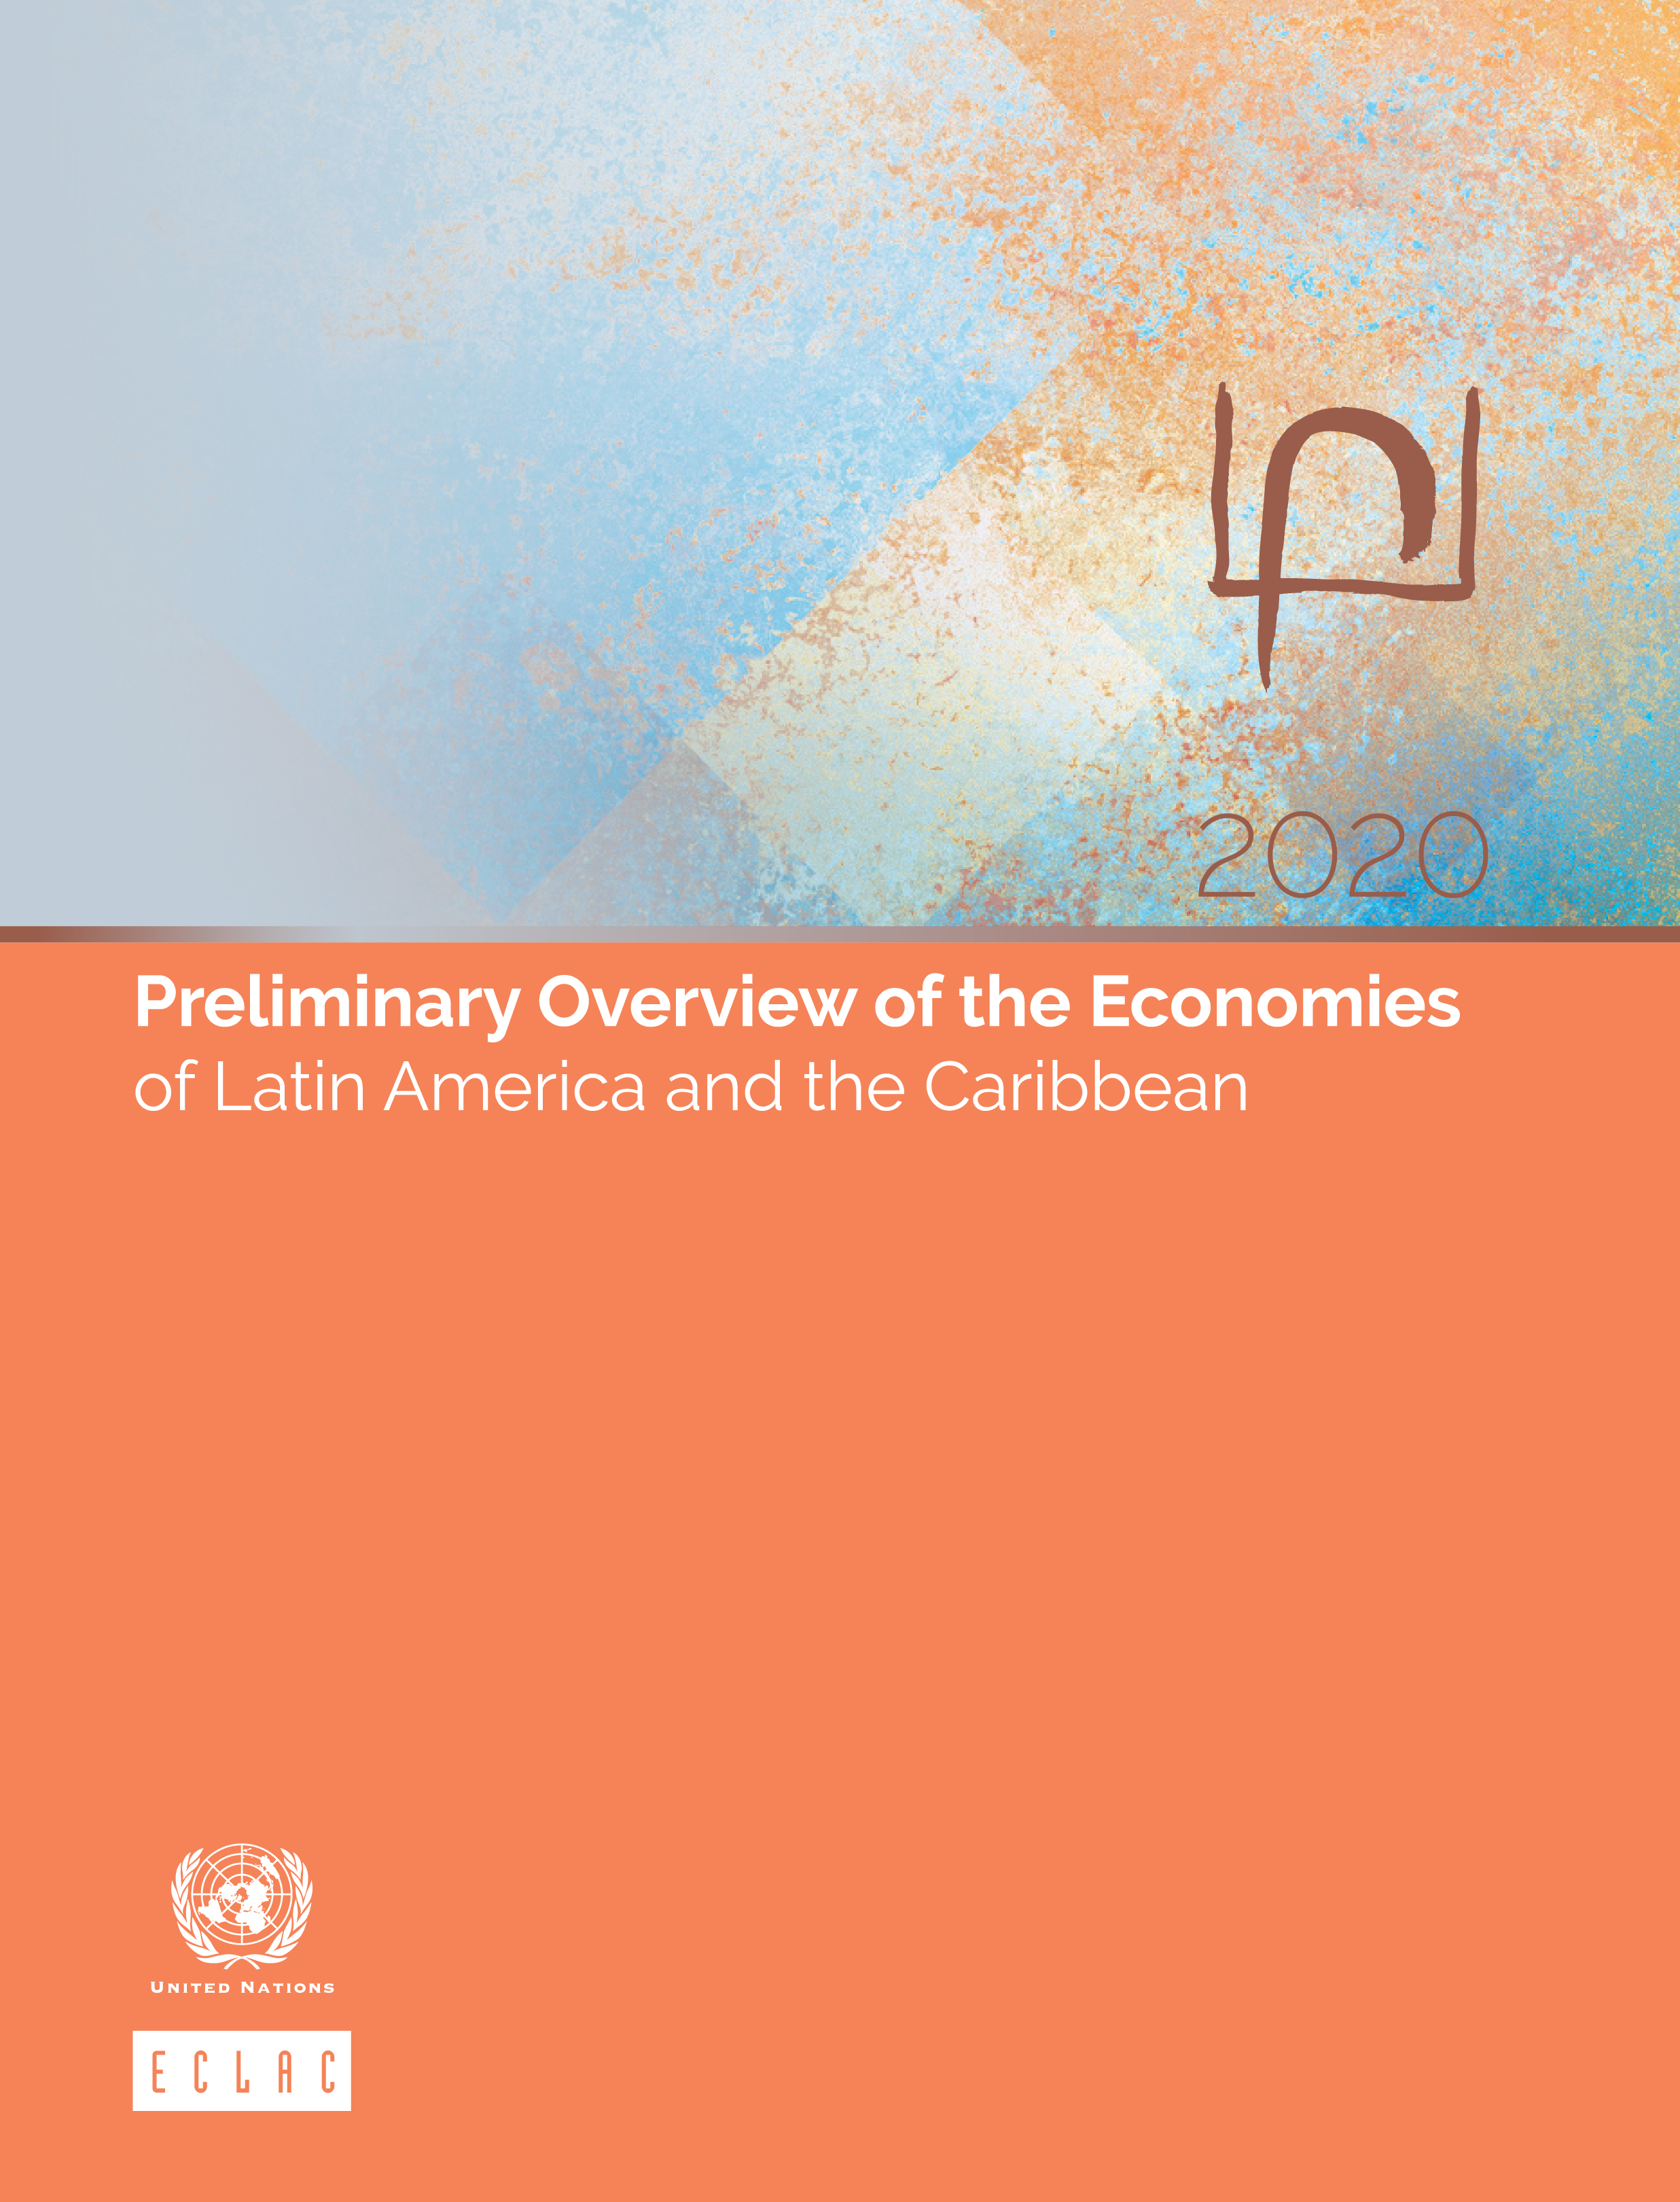 image of Preliminary Overview of the Economies of Latin America and the Caribbean 2020